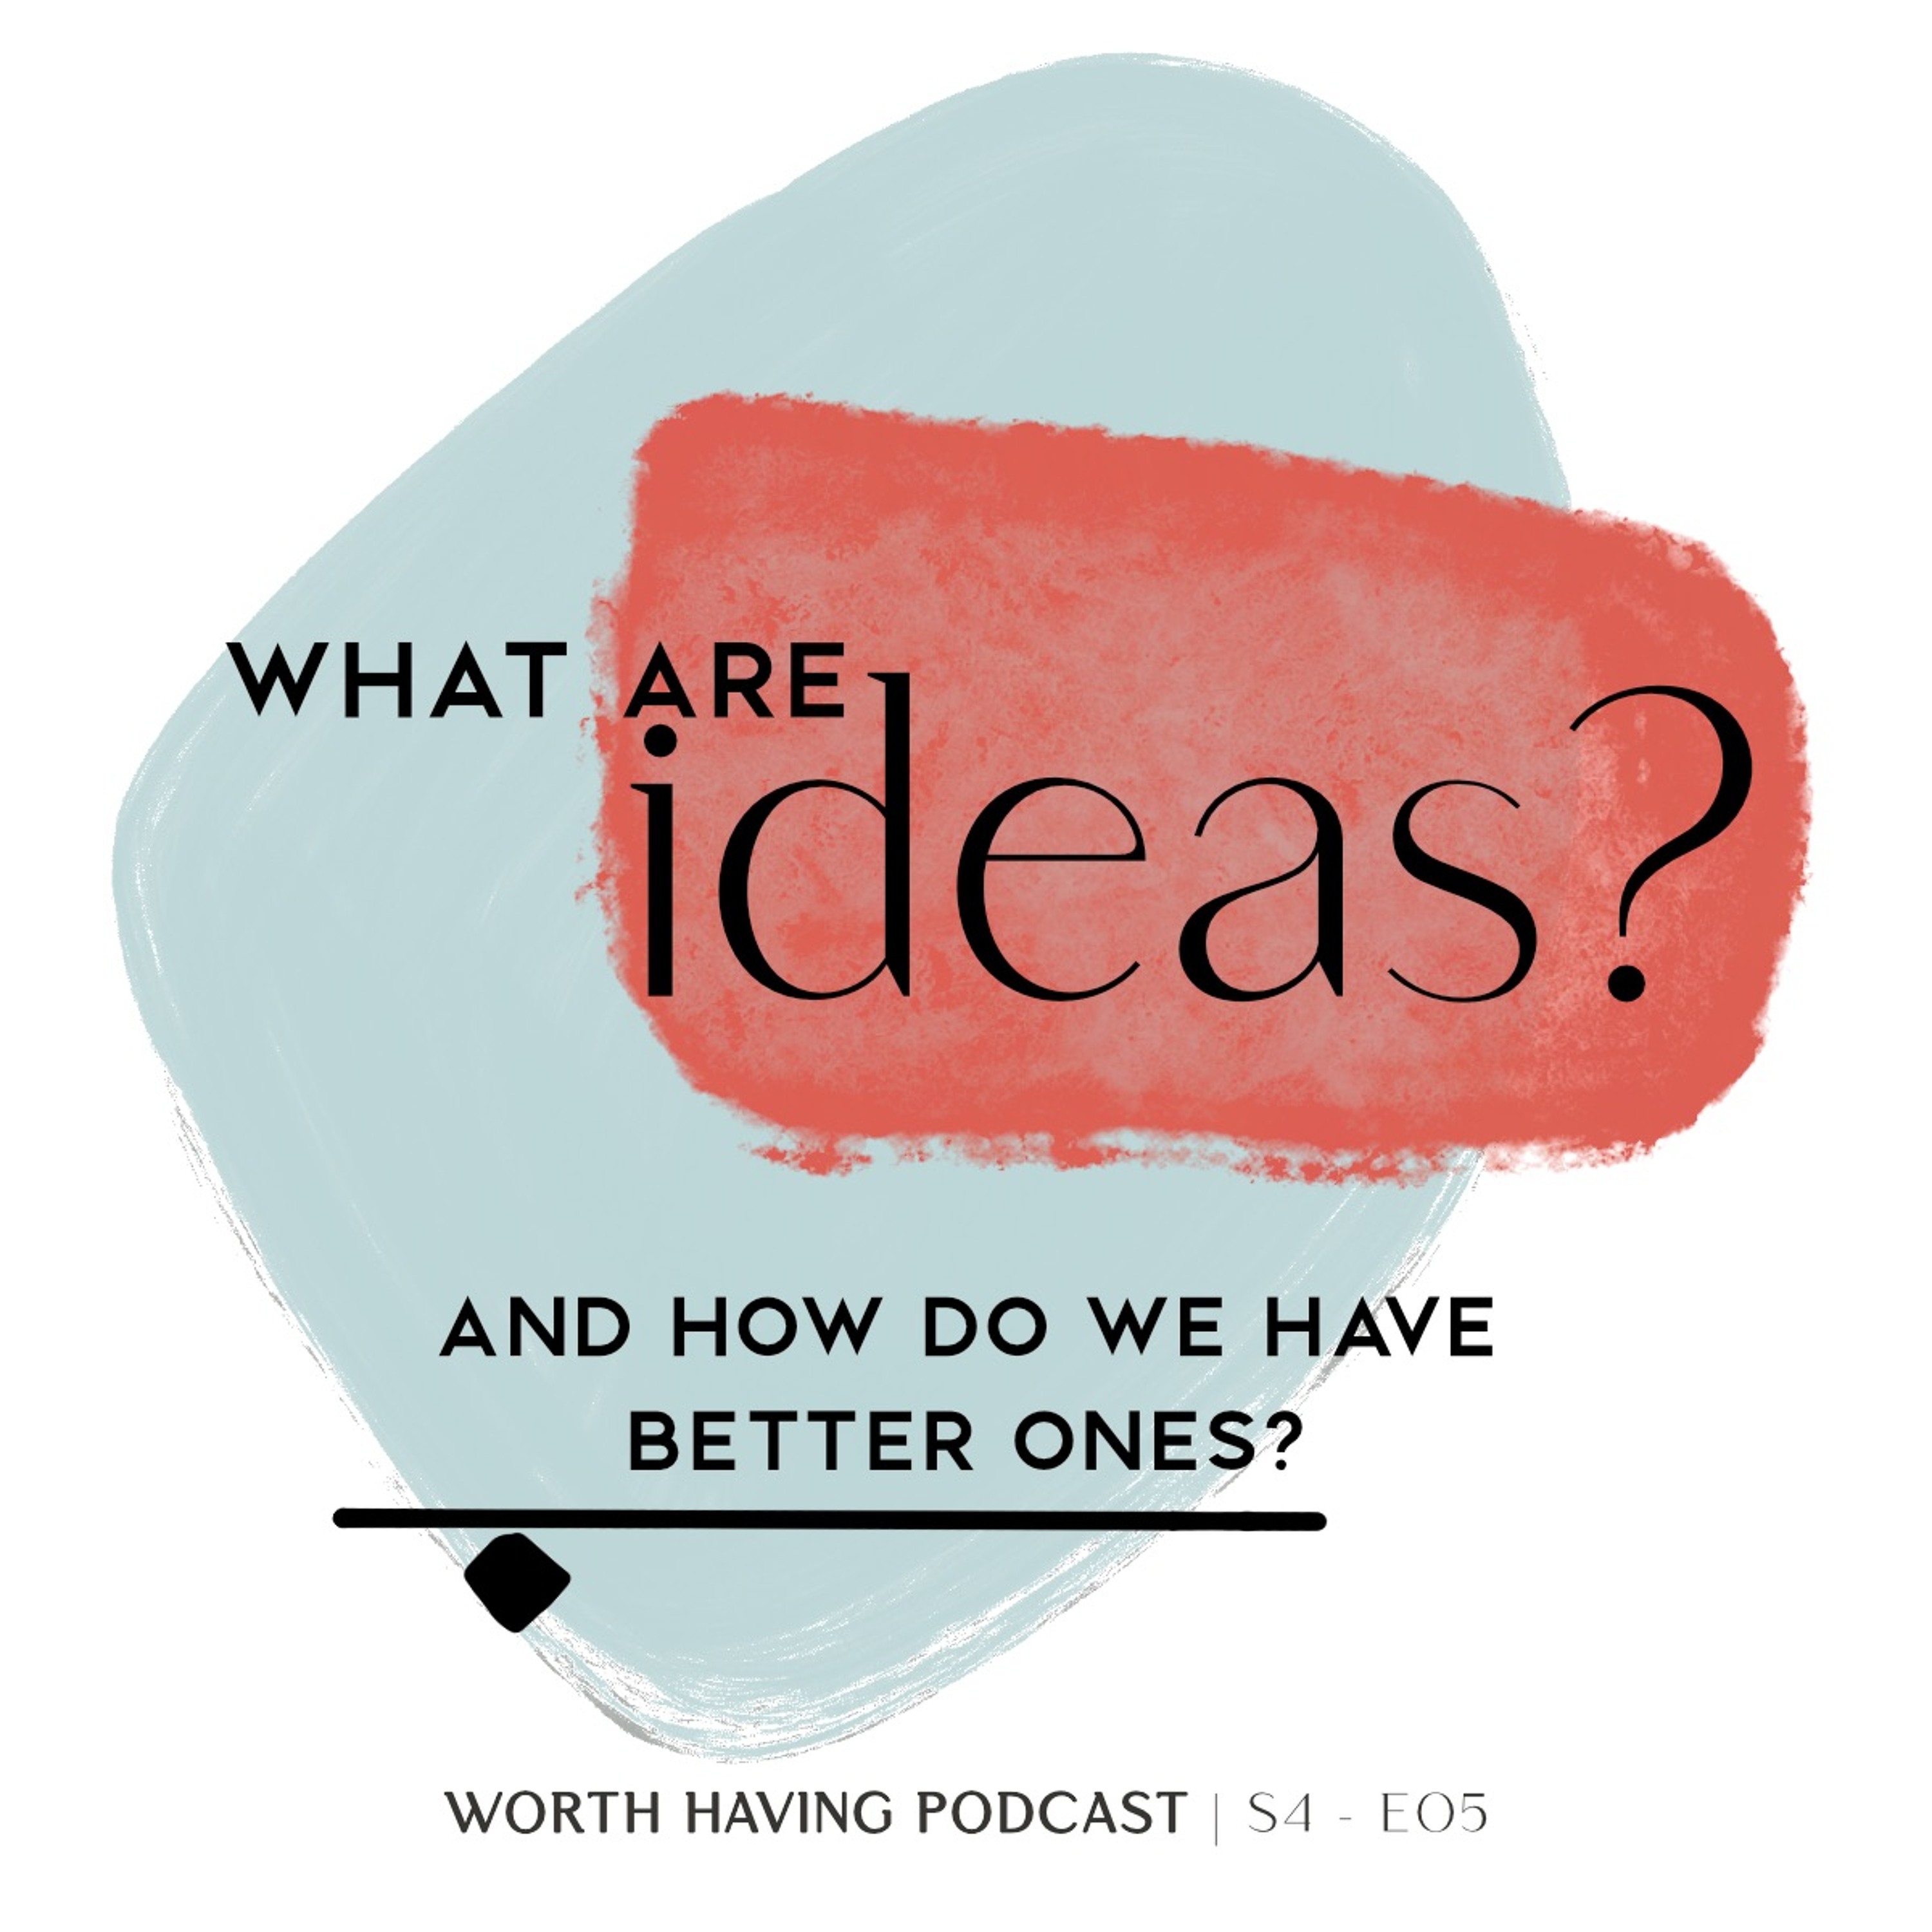 Better ideas - & what you need in order to have them.